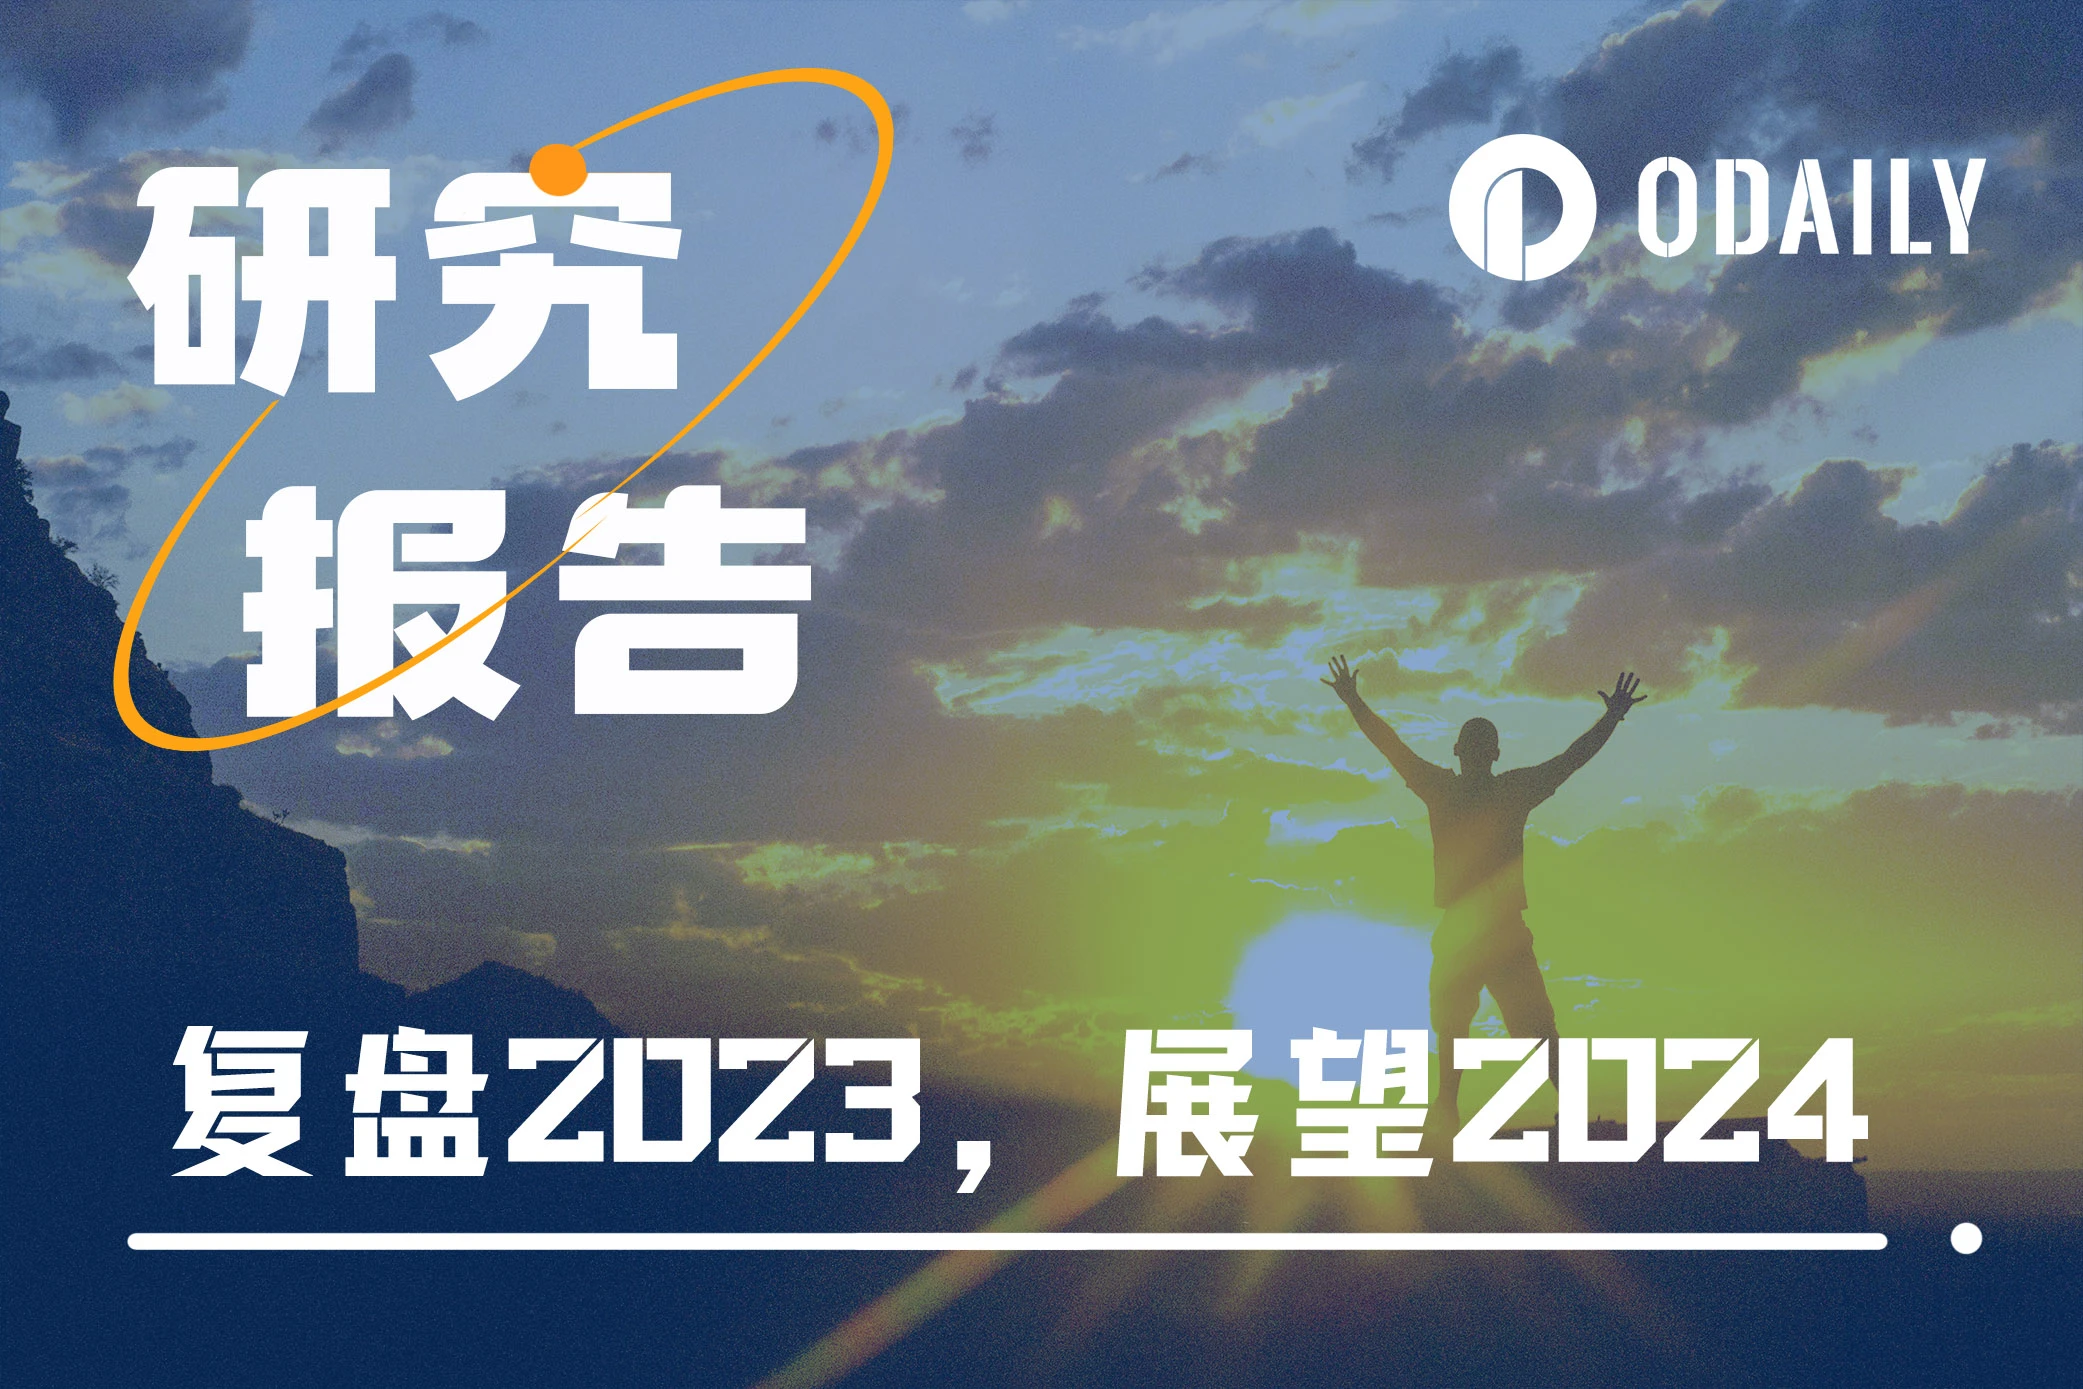 Odaily’s major 10,000-word Web3 research report: Panoramic review of 2023, trend outlook for 2024